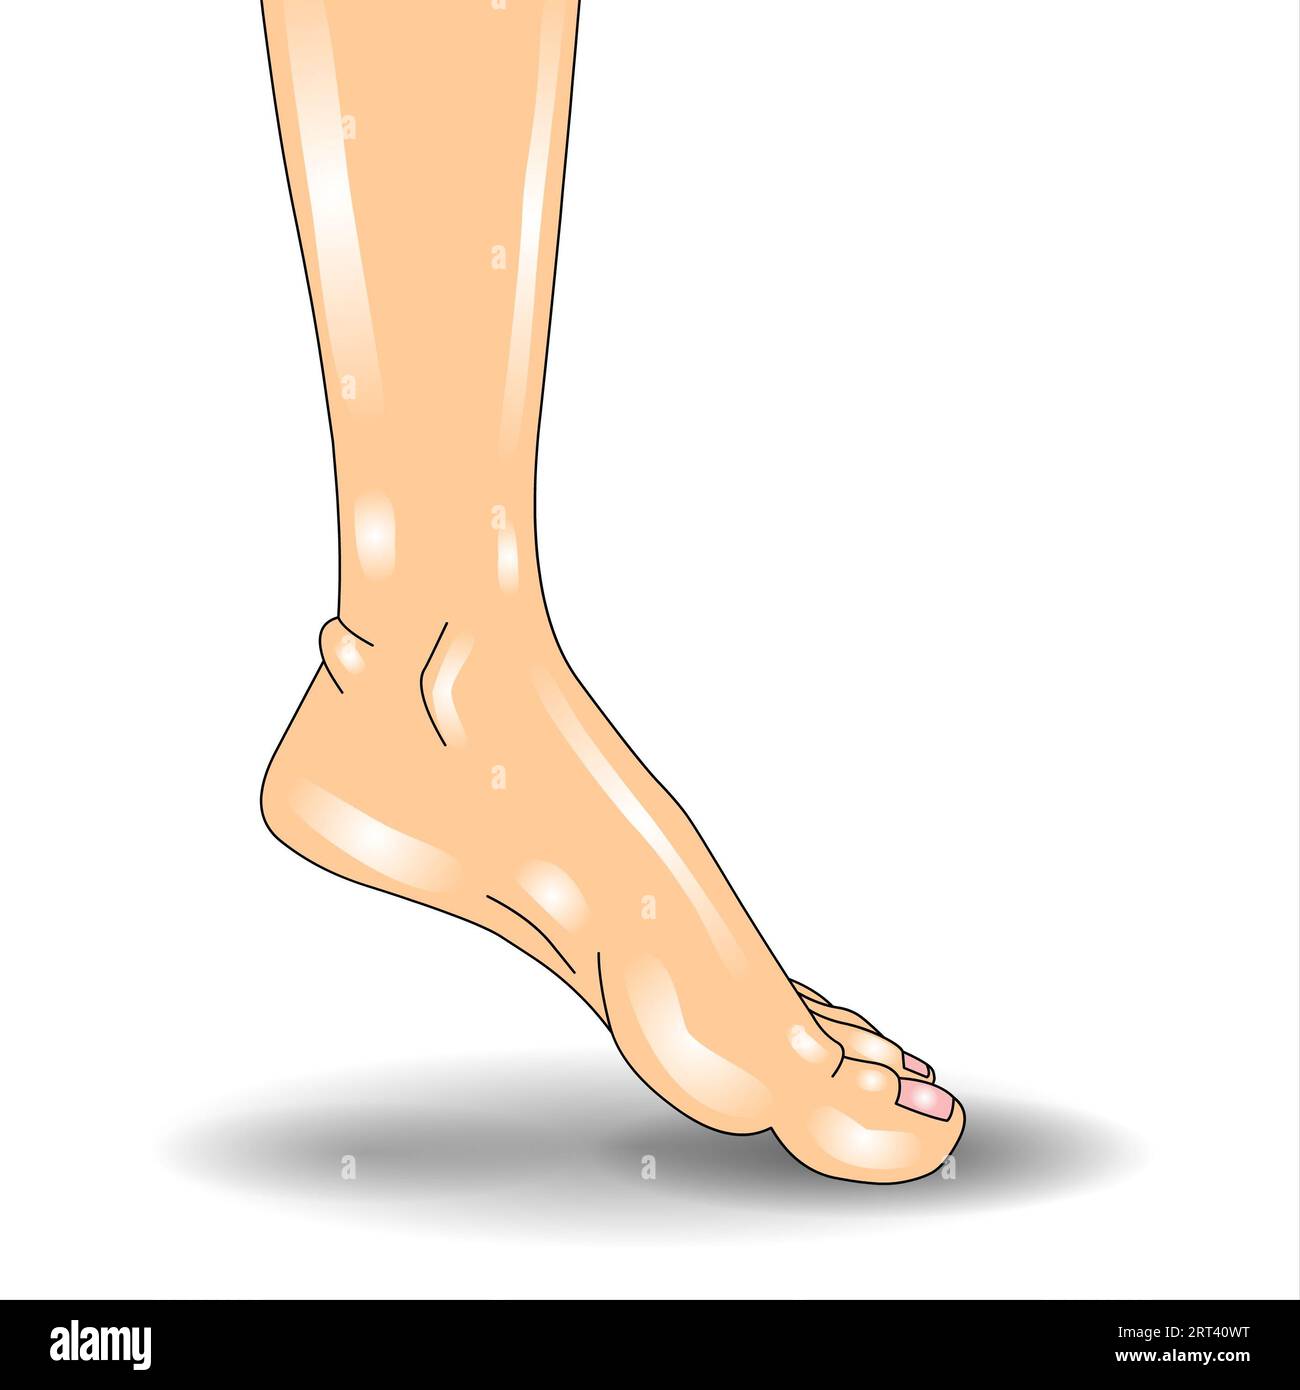 Vector illustration of a male foot on a white background with a shadow Stock Photo